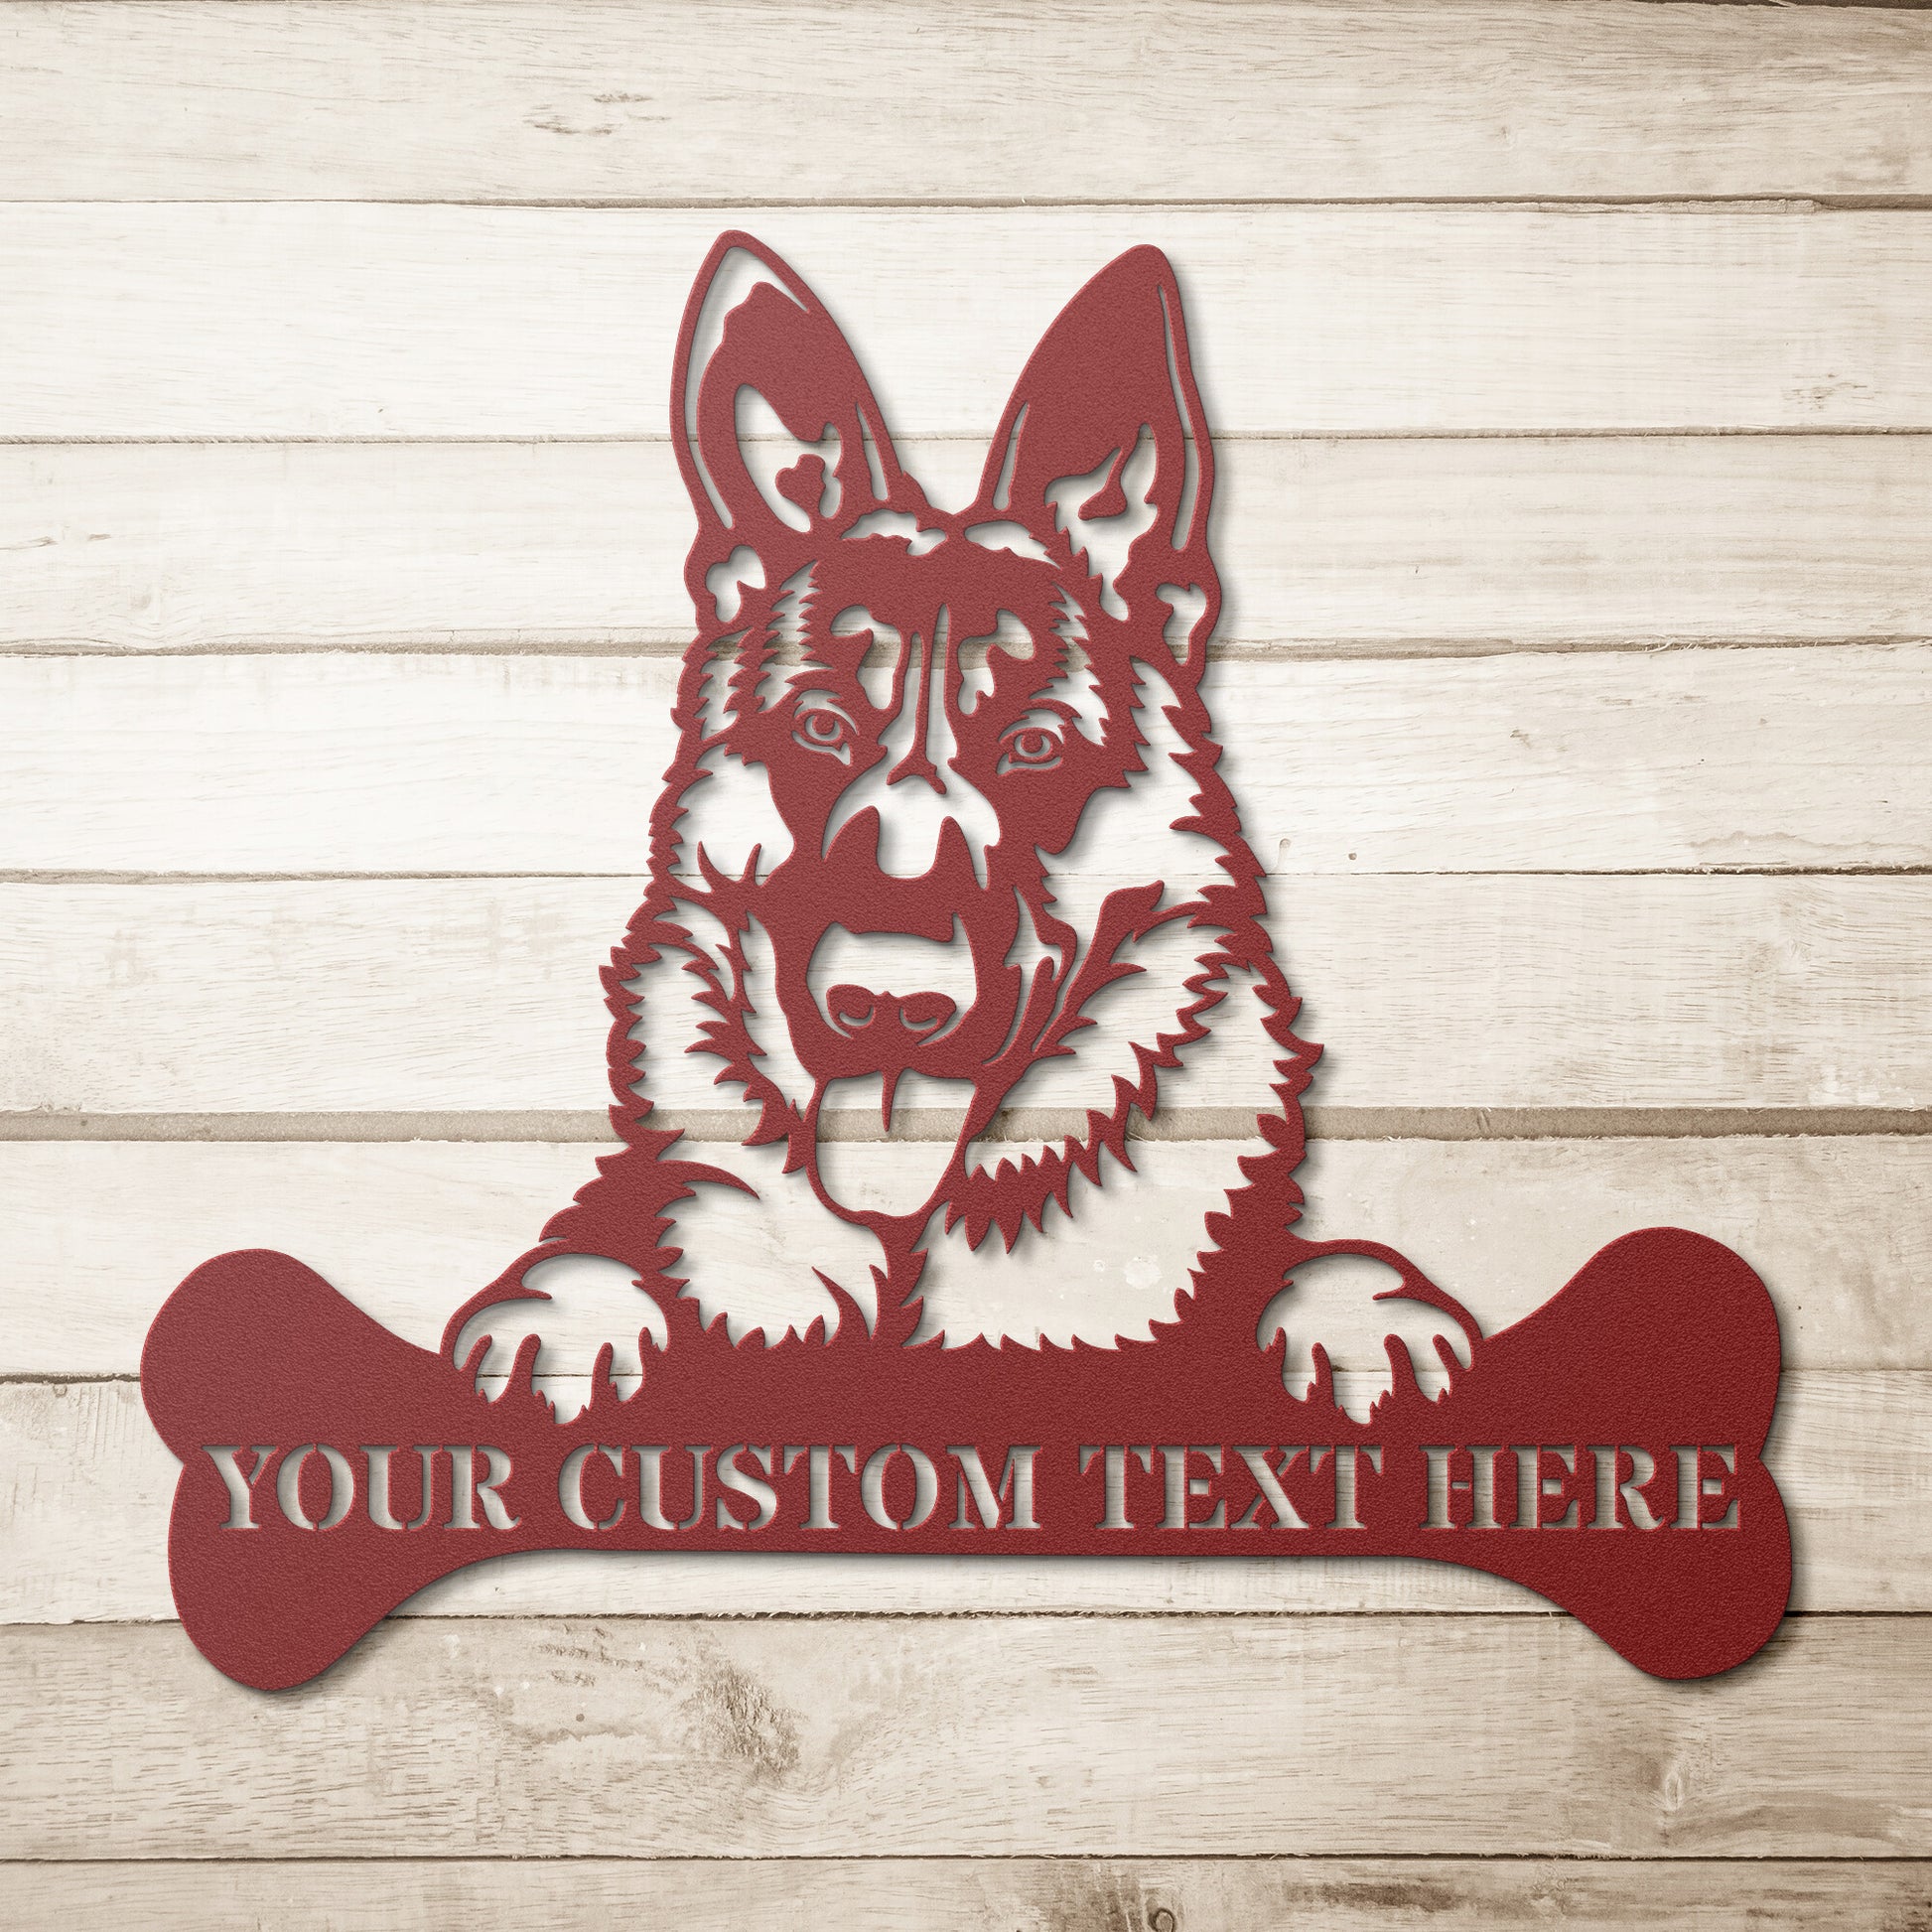 Personalized German Shepherd Name Metal Sign. Customizable Dog Lover Wall Decor Gift. Dog Portrait Yard Sign. Dog House Name Sign. Dog Owner